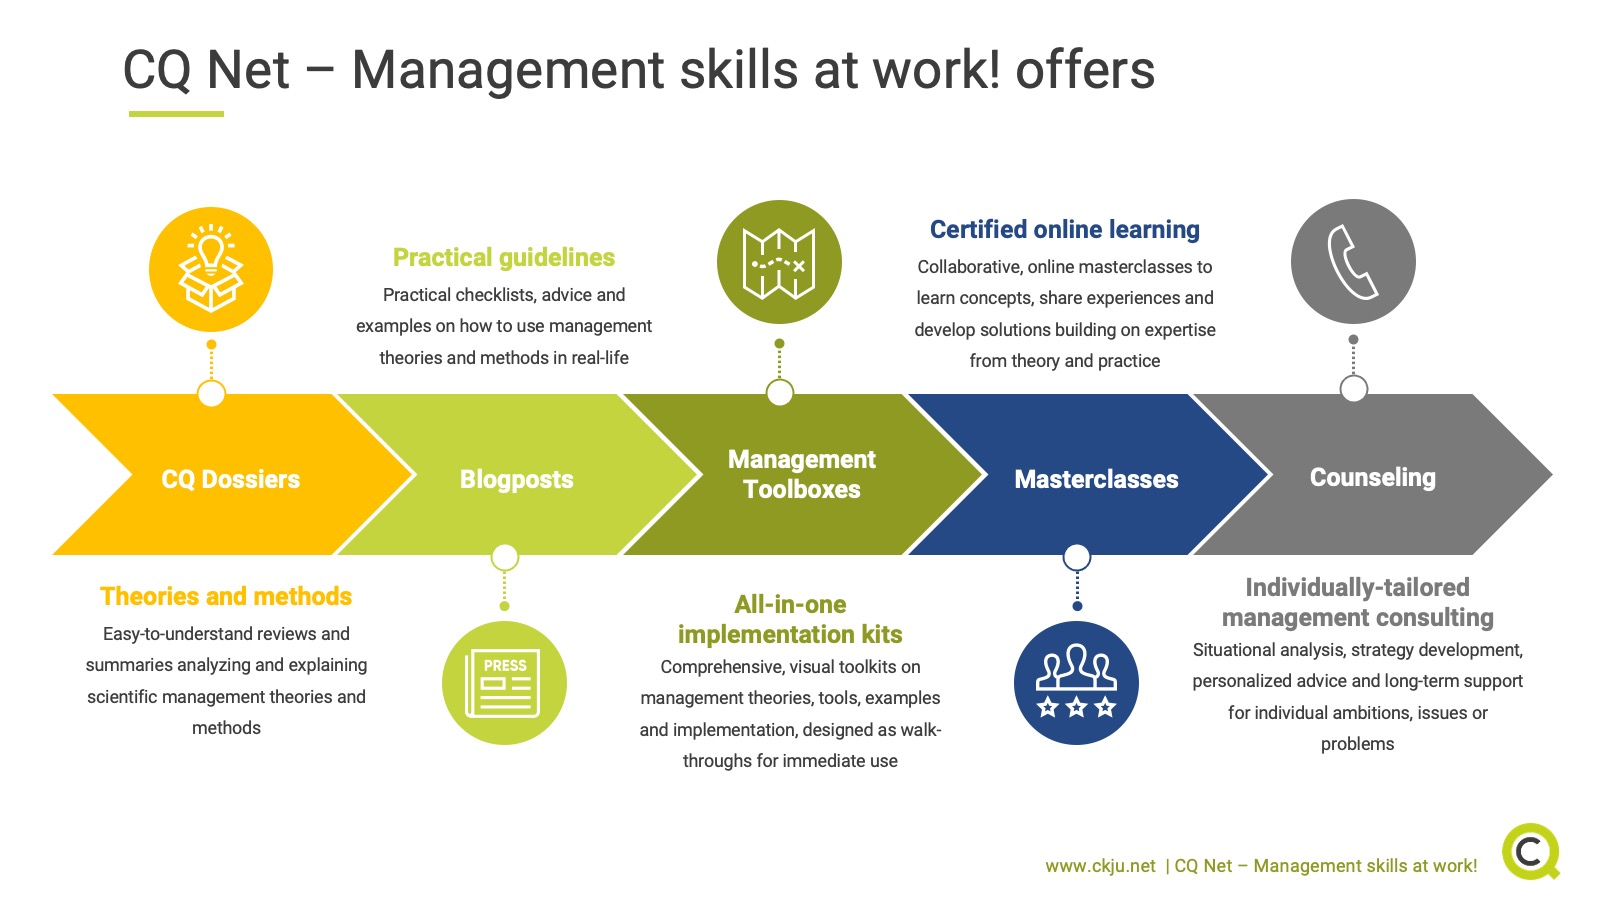 What we offer at CQ Net - Management skills at work!